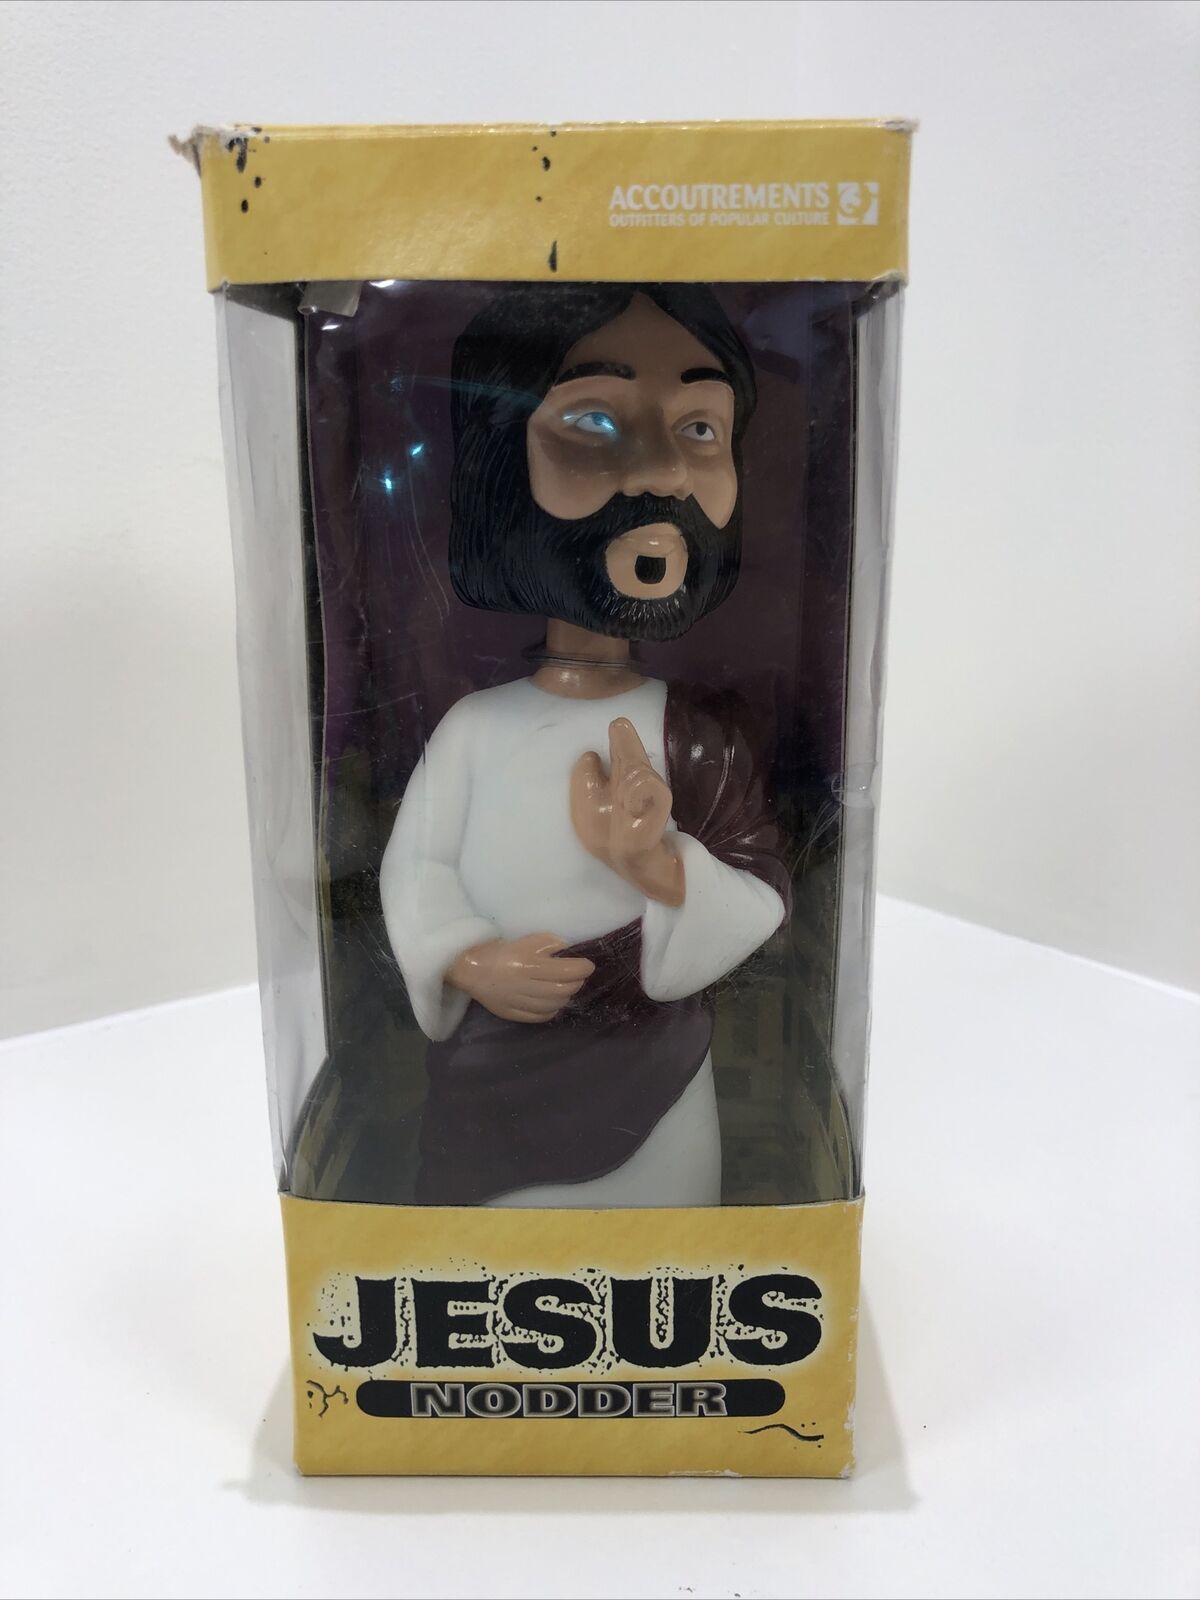 2002 Jesus Nodder 7 inch Bobble Head by Accoutrements